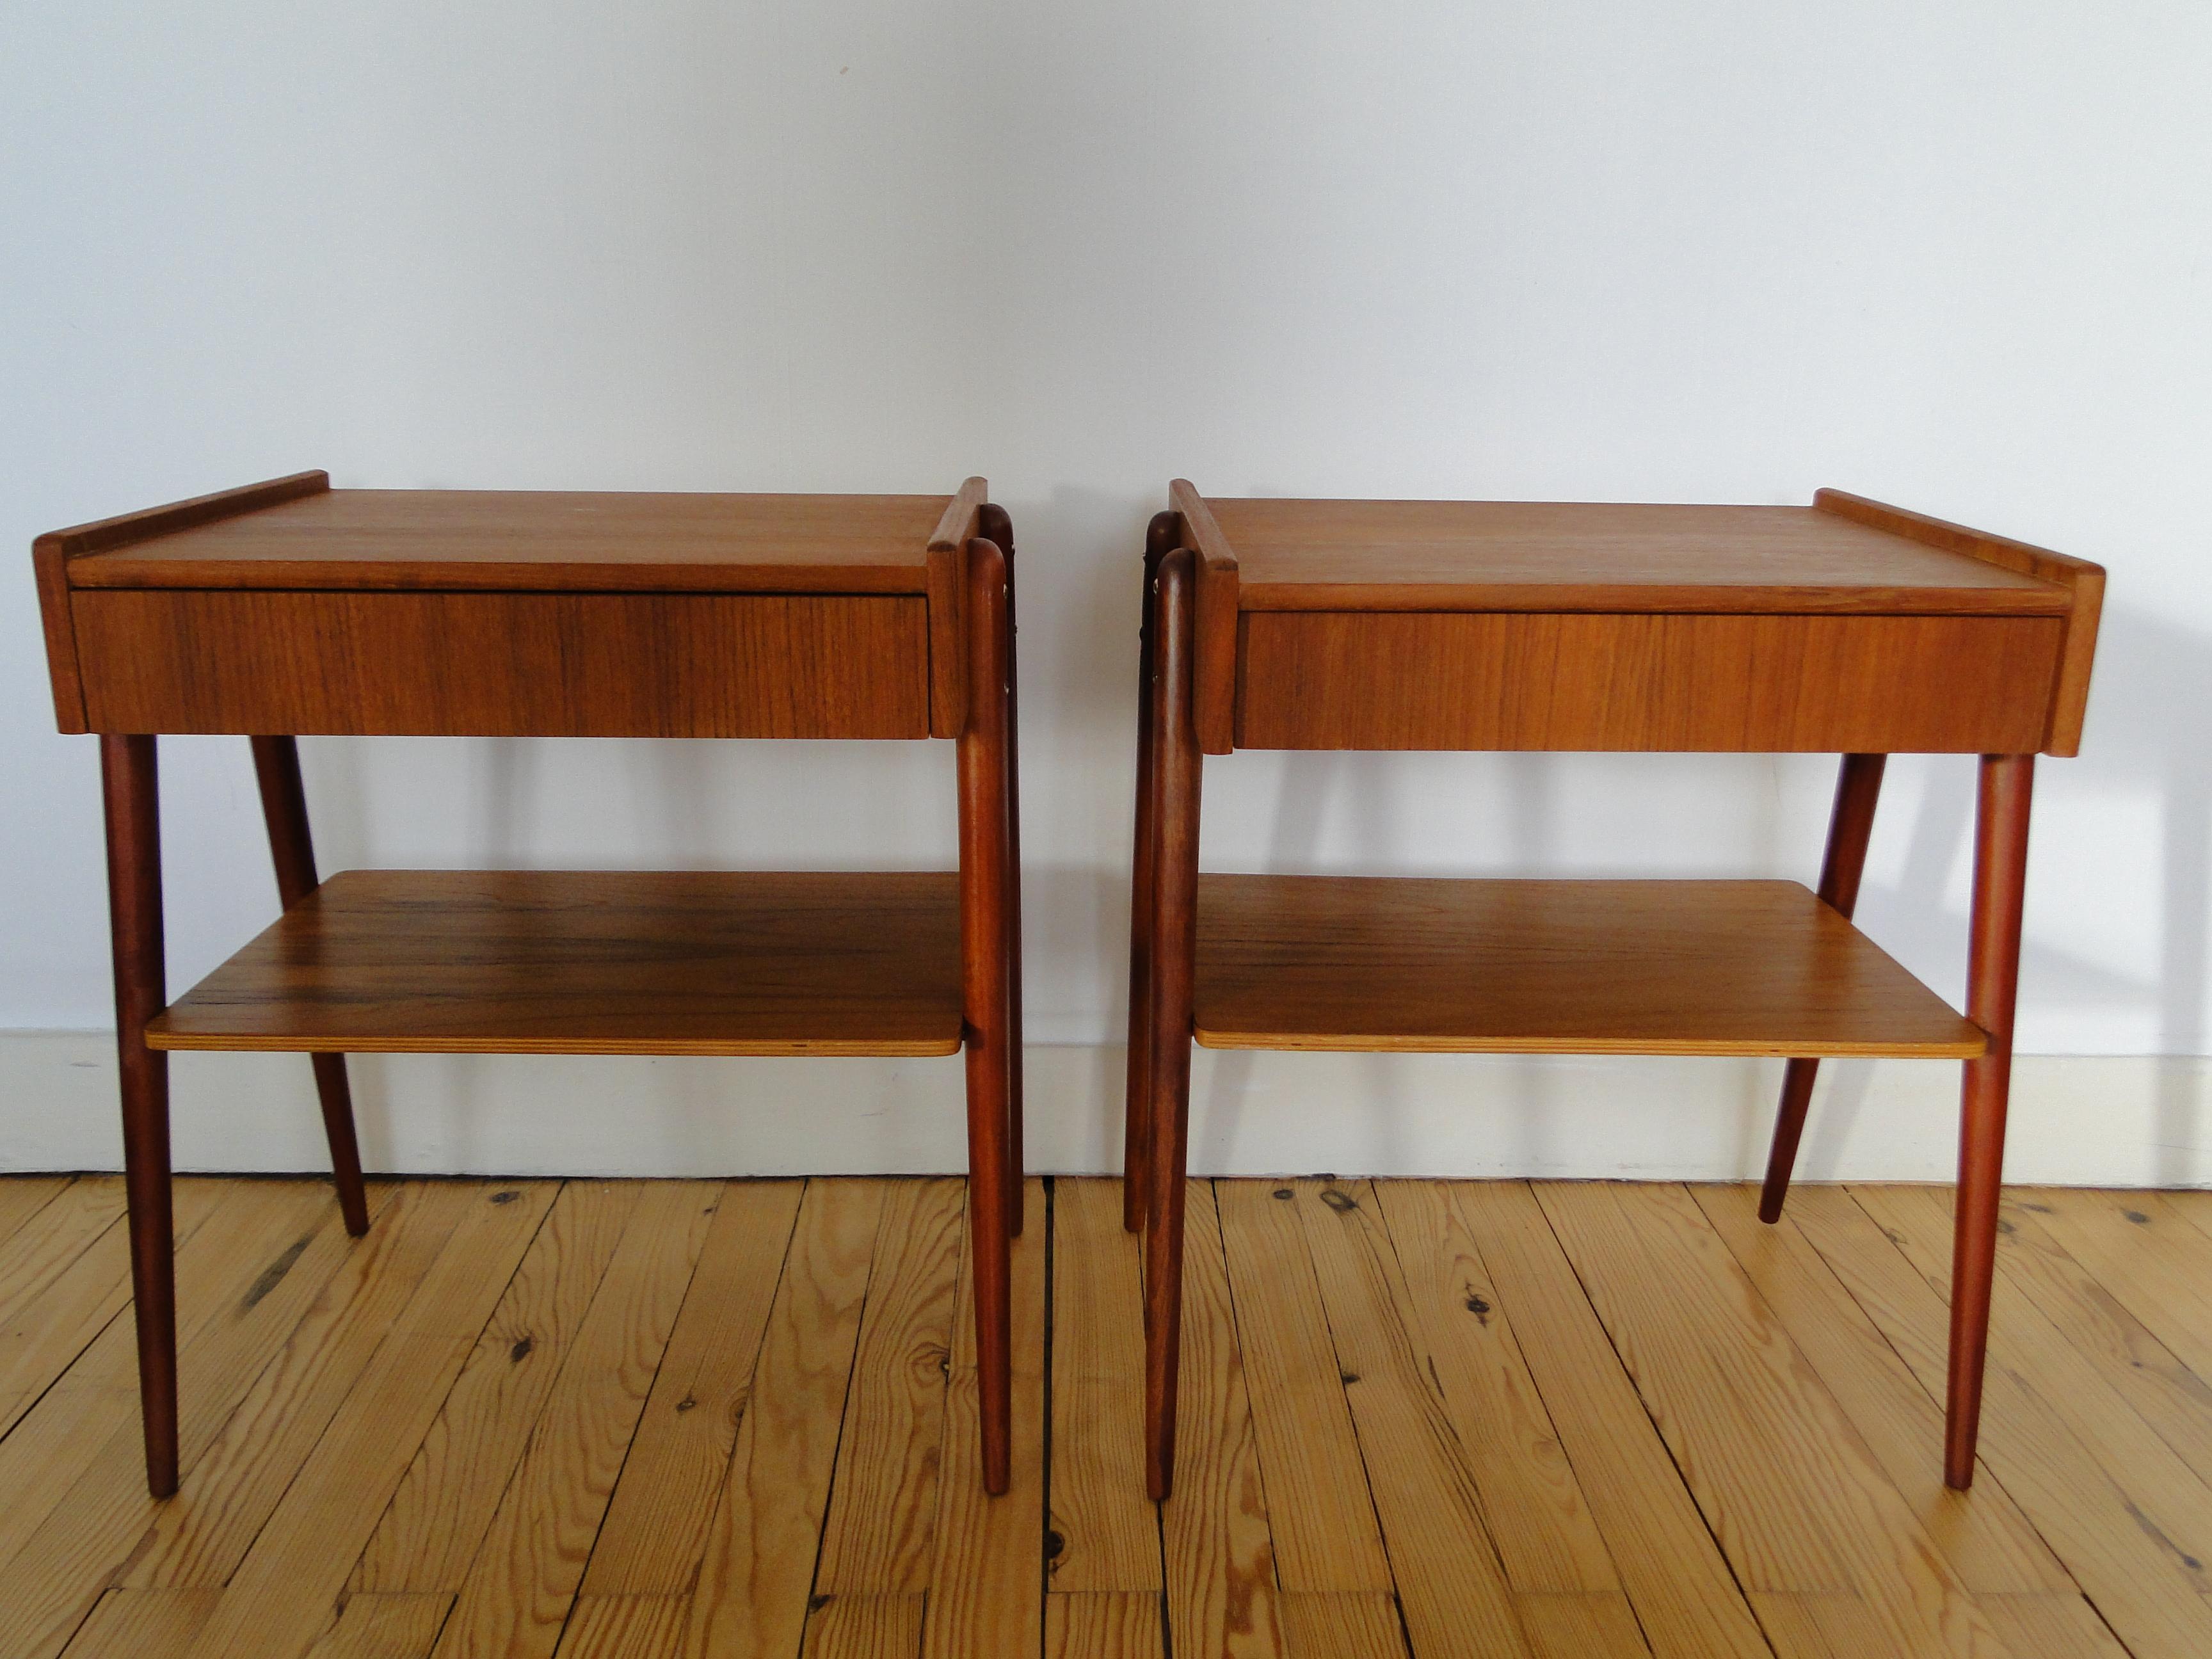 This set of two bedside tables was produced by AB Carlström & Co Möbelfabrik in Sweden at the turn of the 1950s and 1960s.

This set of two bedside tables was produced by AB Carlström & Co Möbelfabrik in Sweden at the turn of the 1950s and